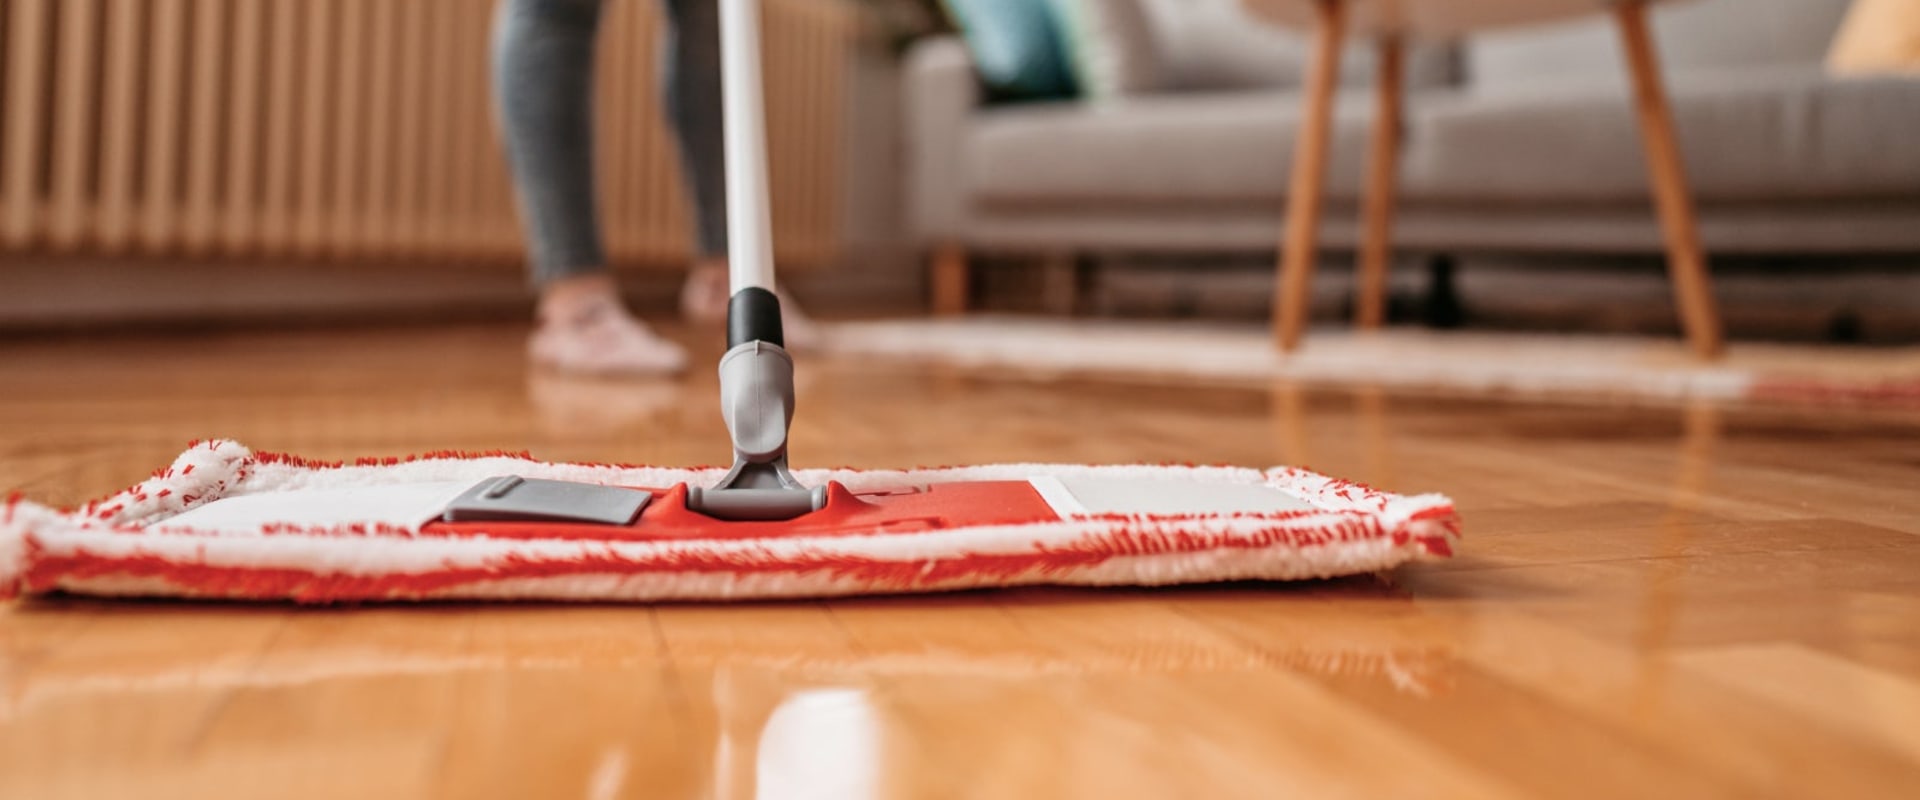 All-purpose Wood Floor Cleaners: The Ultimate Guide to Effective and Safe Cleaning